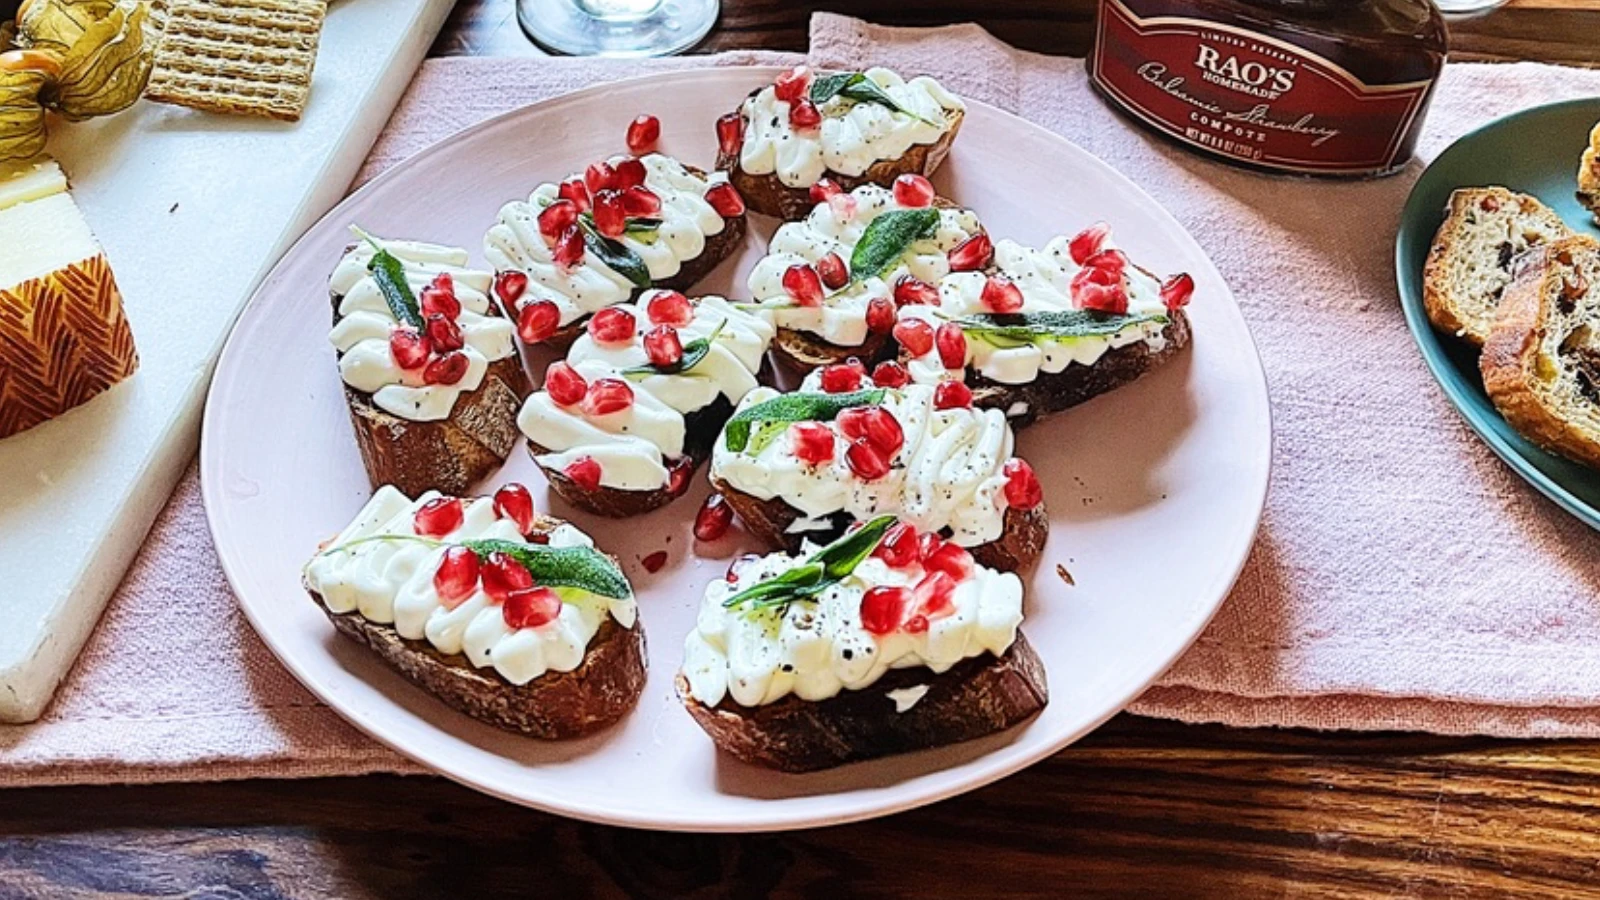 Image of Whipped Ricotta Toasts with Rao’s Homemade Balsamic Strawberry Compote